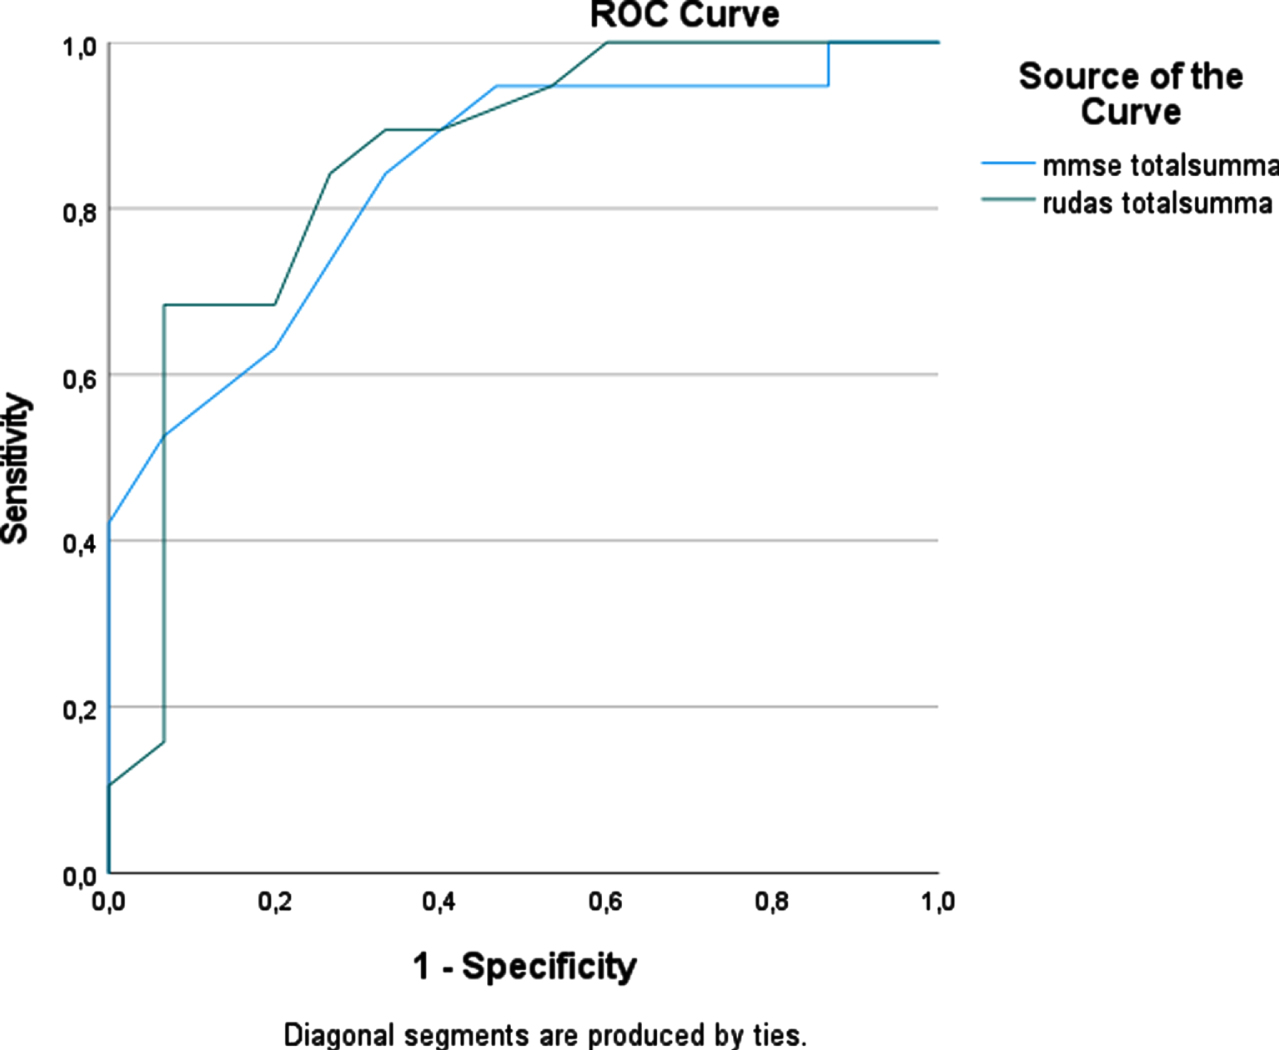 ROC curve for the RUDAS-S and the MMSE-SR for detecting dementia in the NNS groups (n = 34).